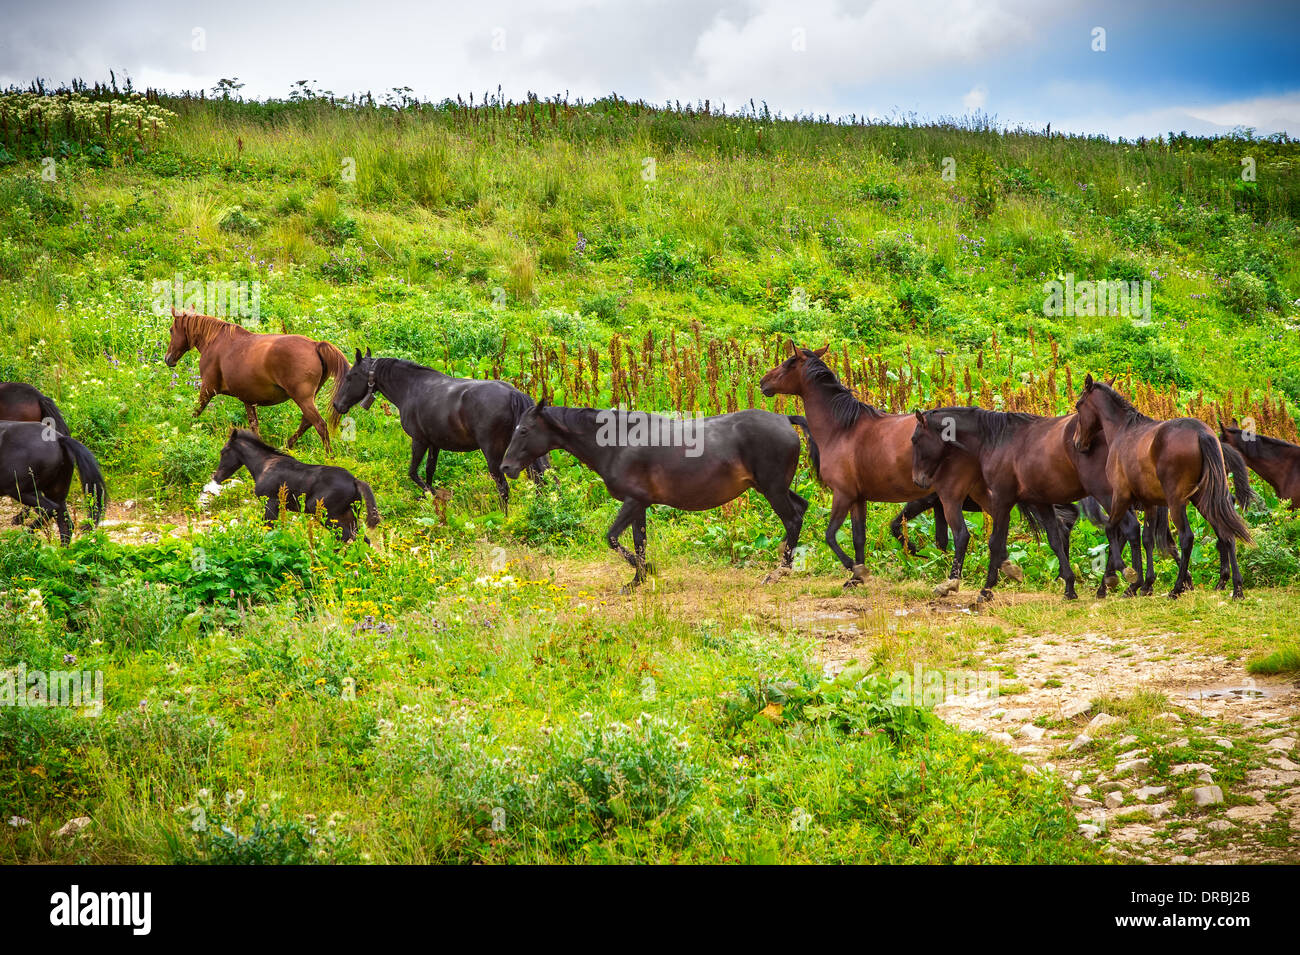 Horses herd running on Green Valley in Mountains rural Landscape Stock Photo